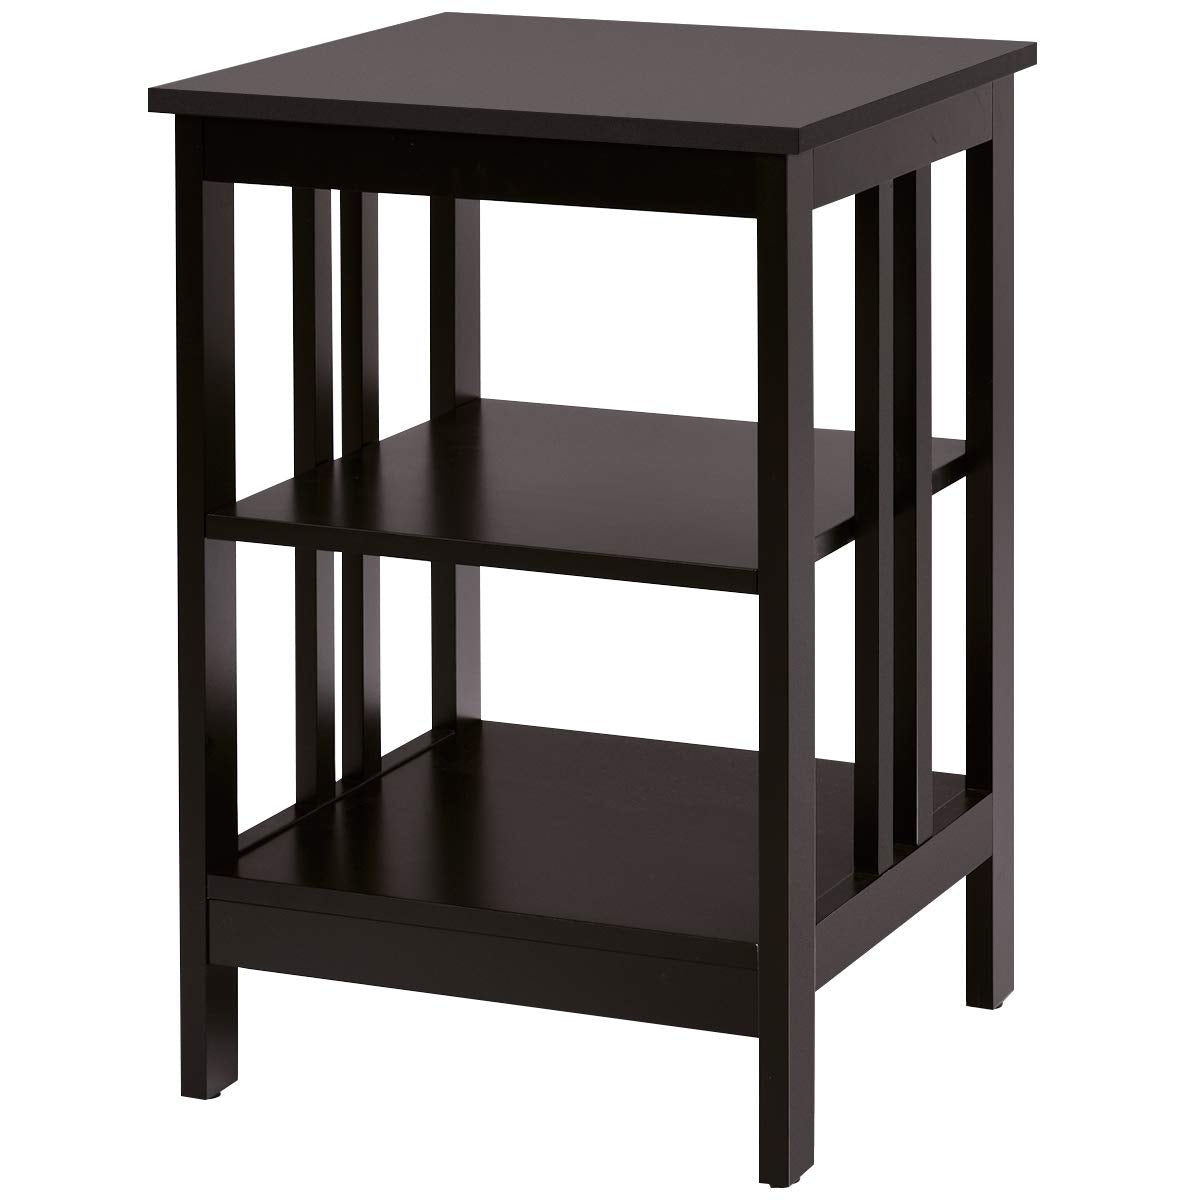 Giantex Nightstand 3-Tier Sofa Side Table W/Reinforced Bars and Stable Structure